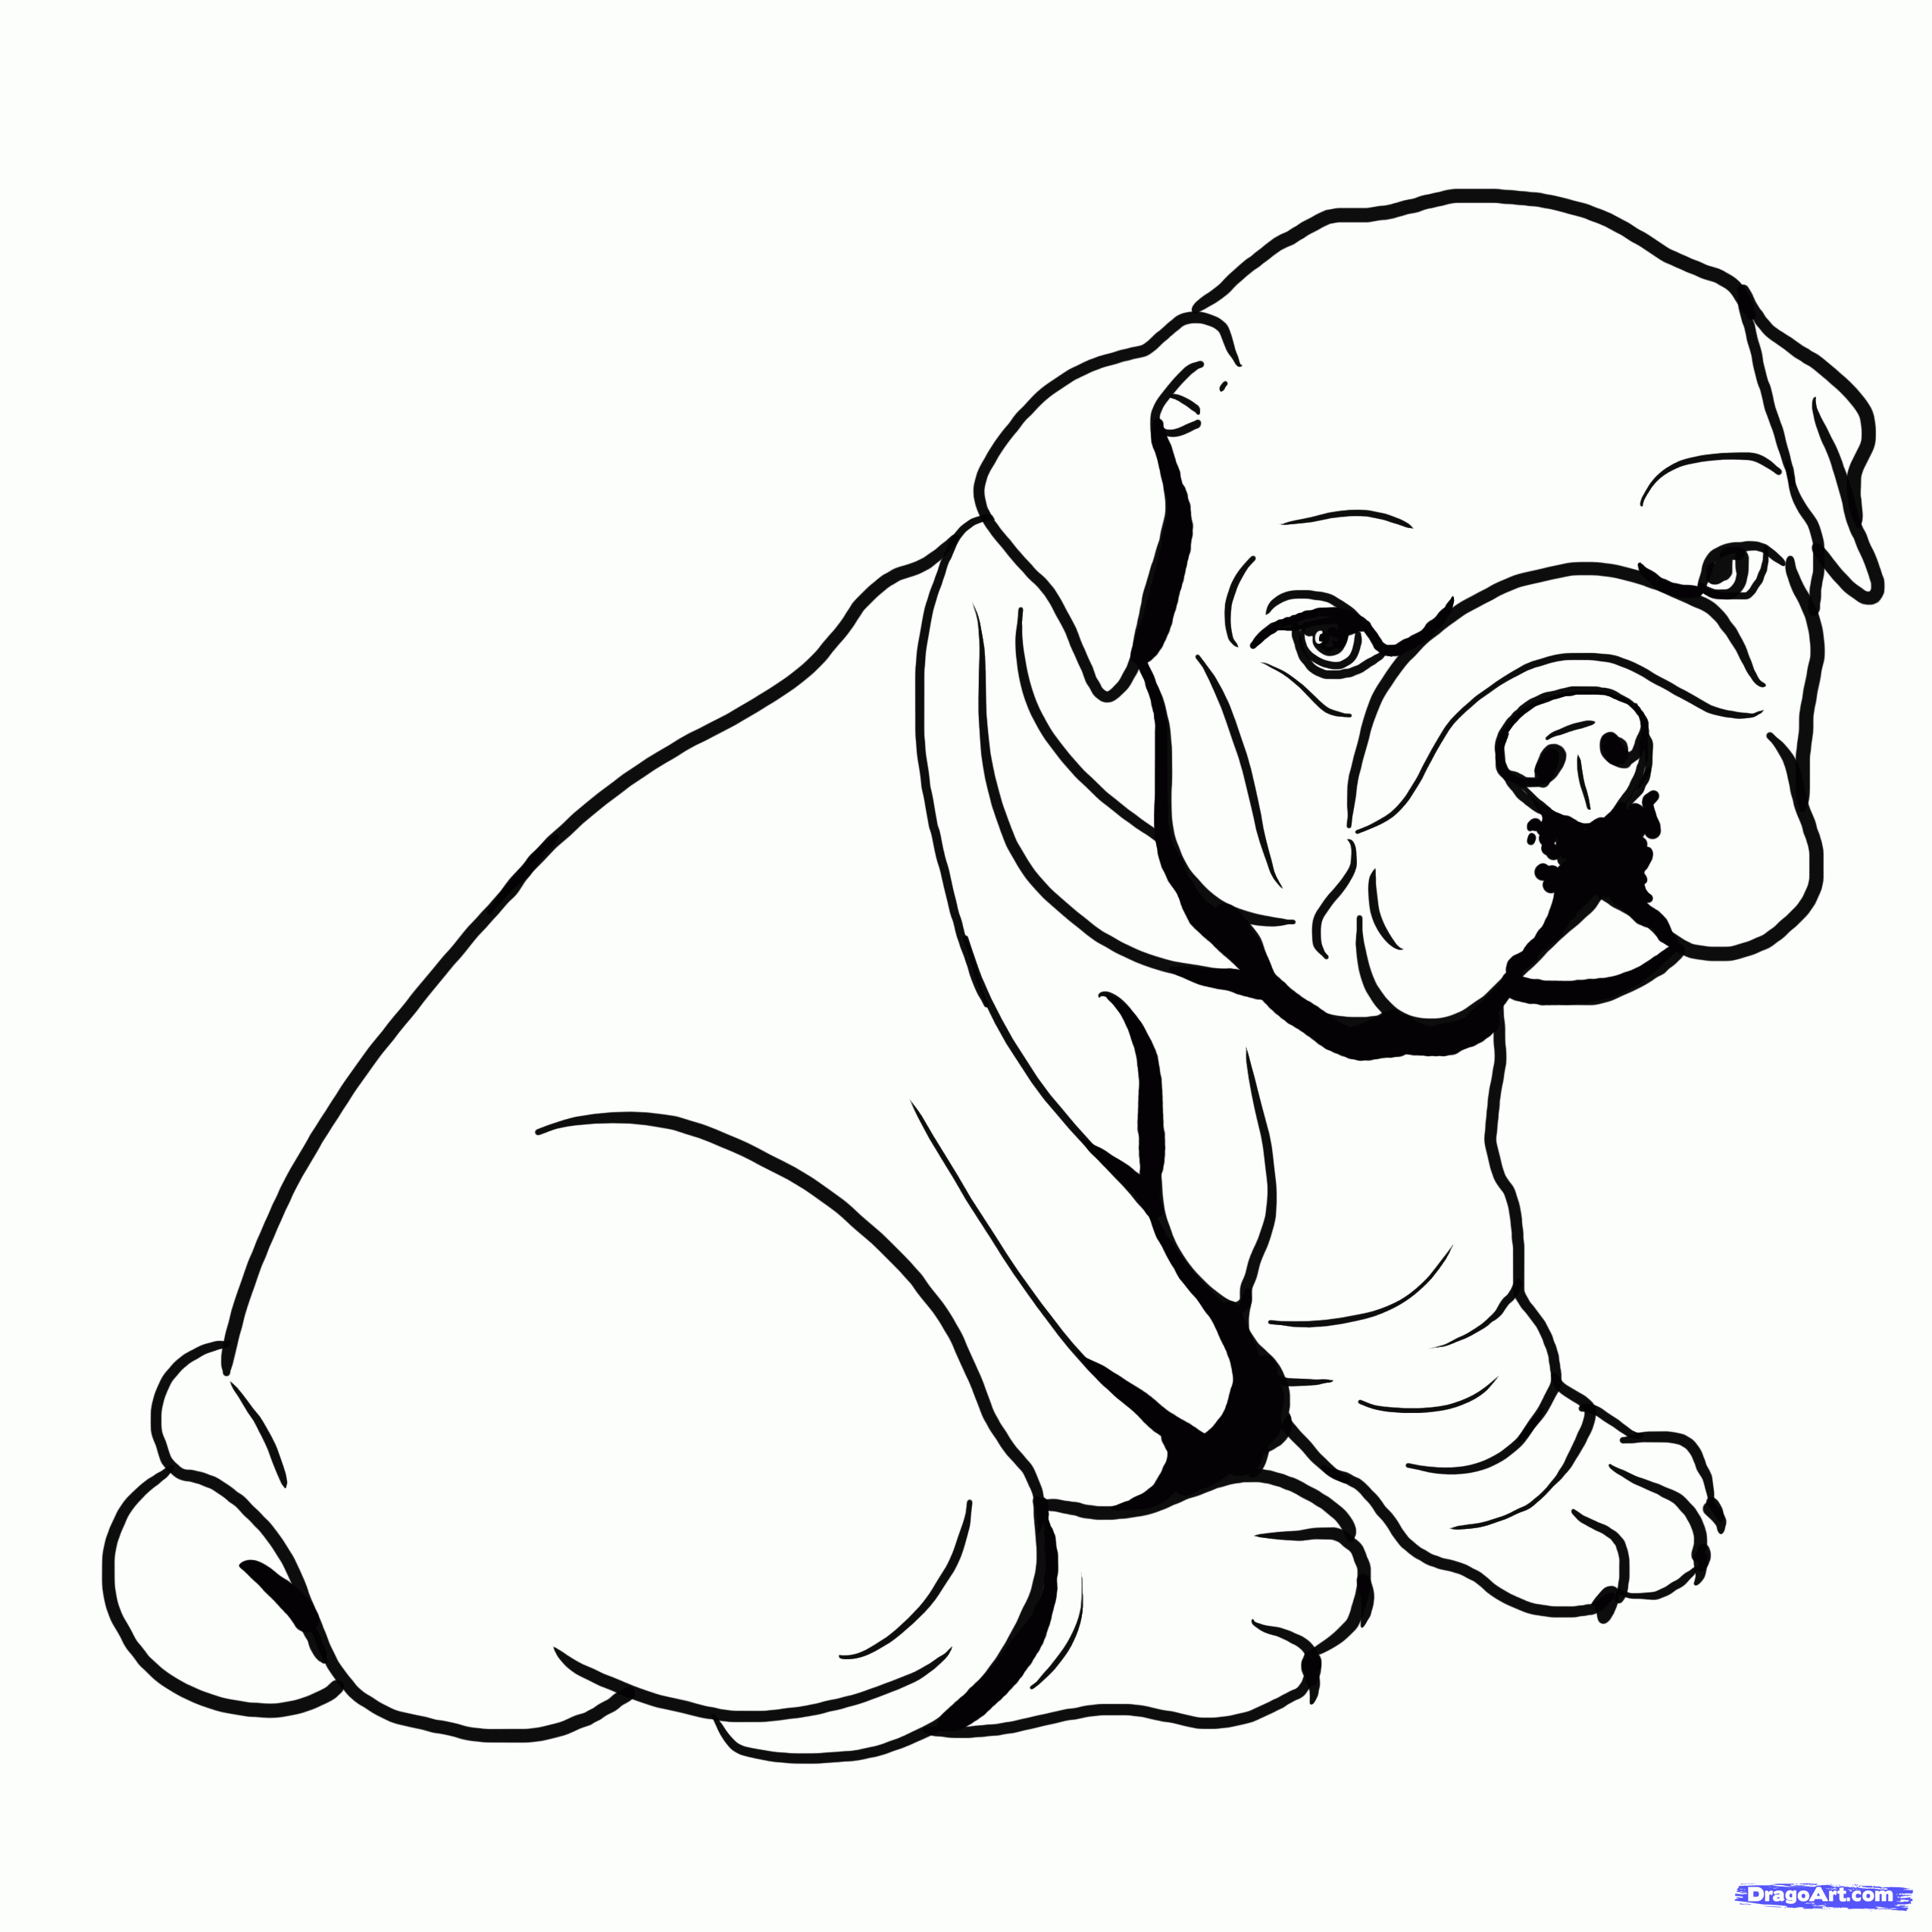 Bulldog Printable Coloring Pages For Kids And For Adults Coloring Home